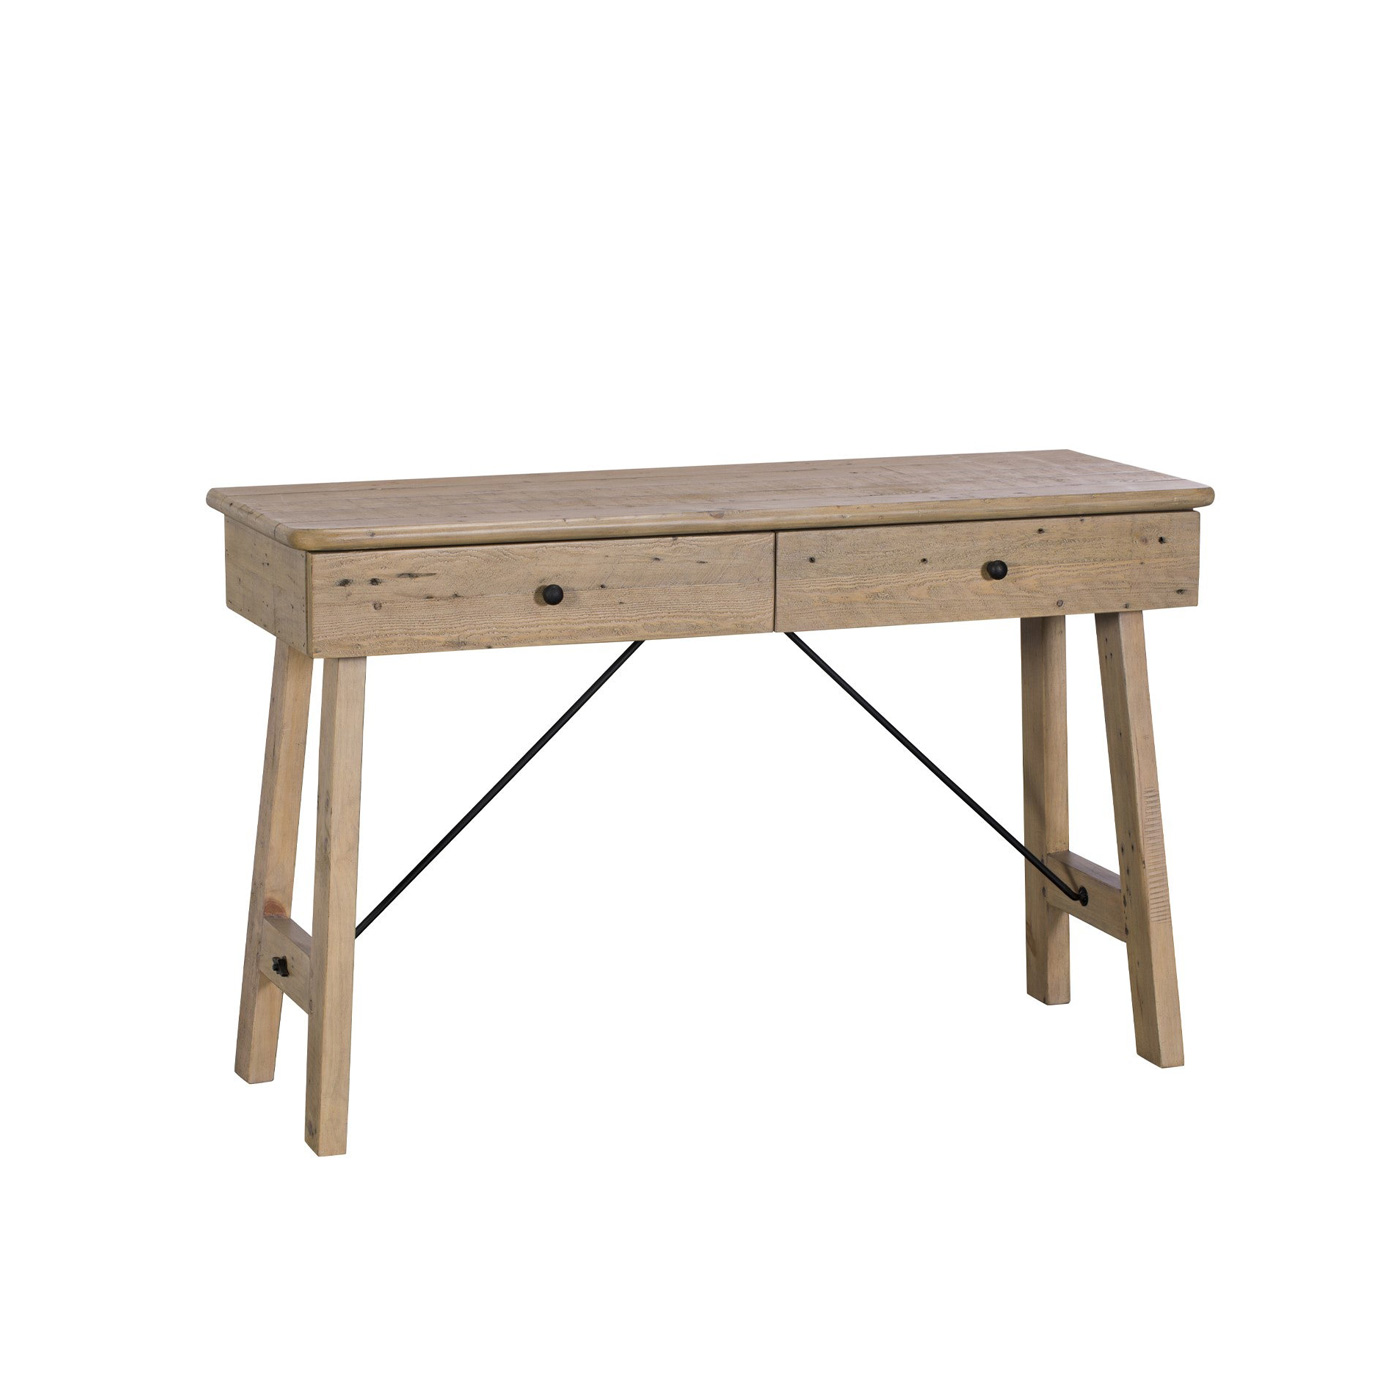 Console Tables Can Also Make Great Desks - Shop Our Collection Online